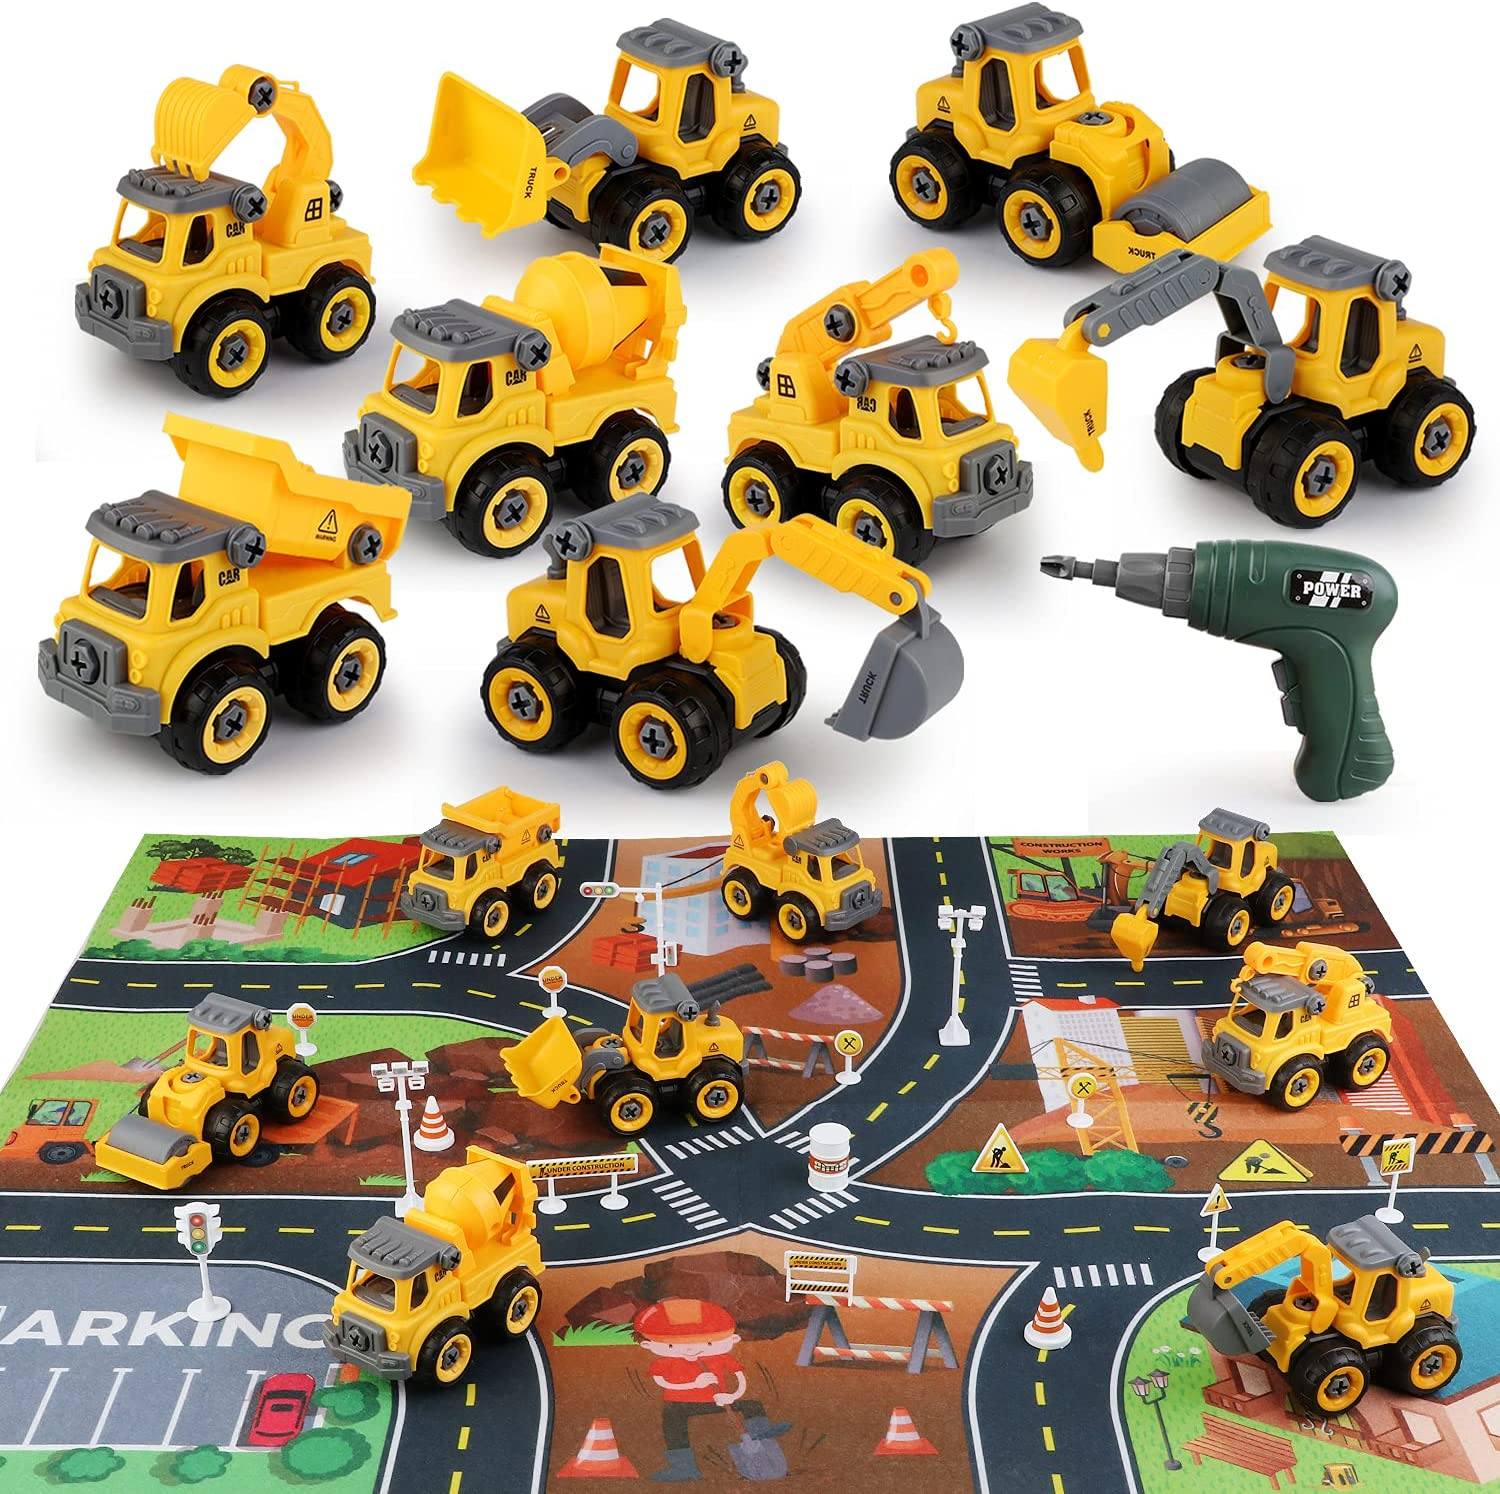 Voiinoiu Toy for boy 3,4,5,6,7,8 33 Piece Take A-Part Construction Toy with Drill Tool Great Gift Idea for Ages 3 and up Boys and Girls 